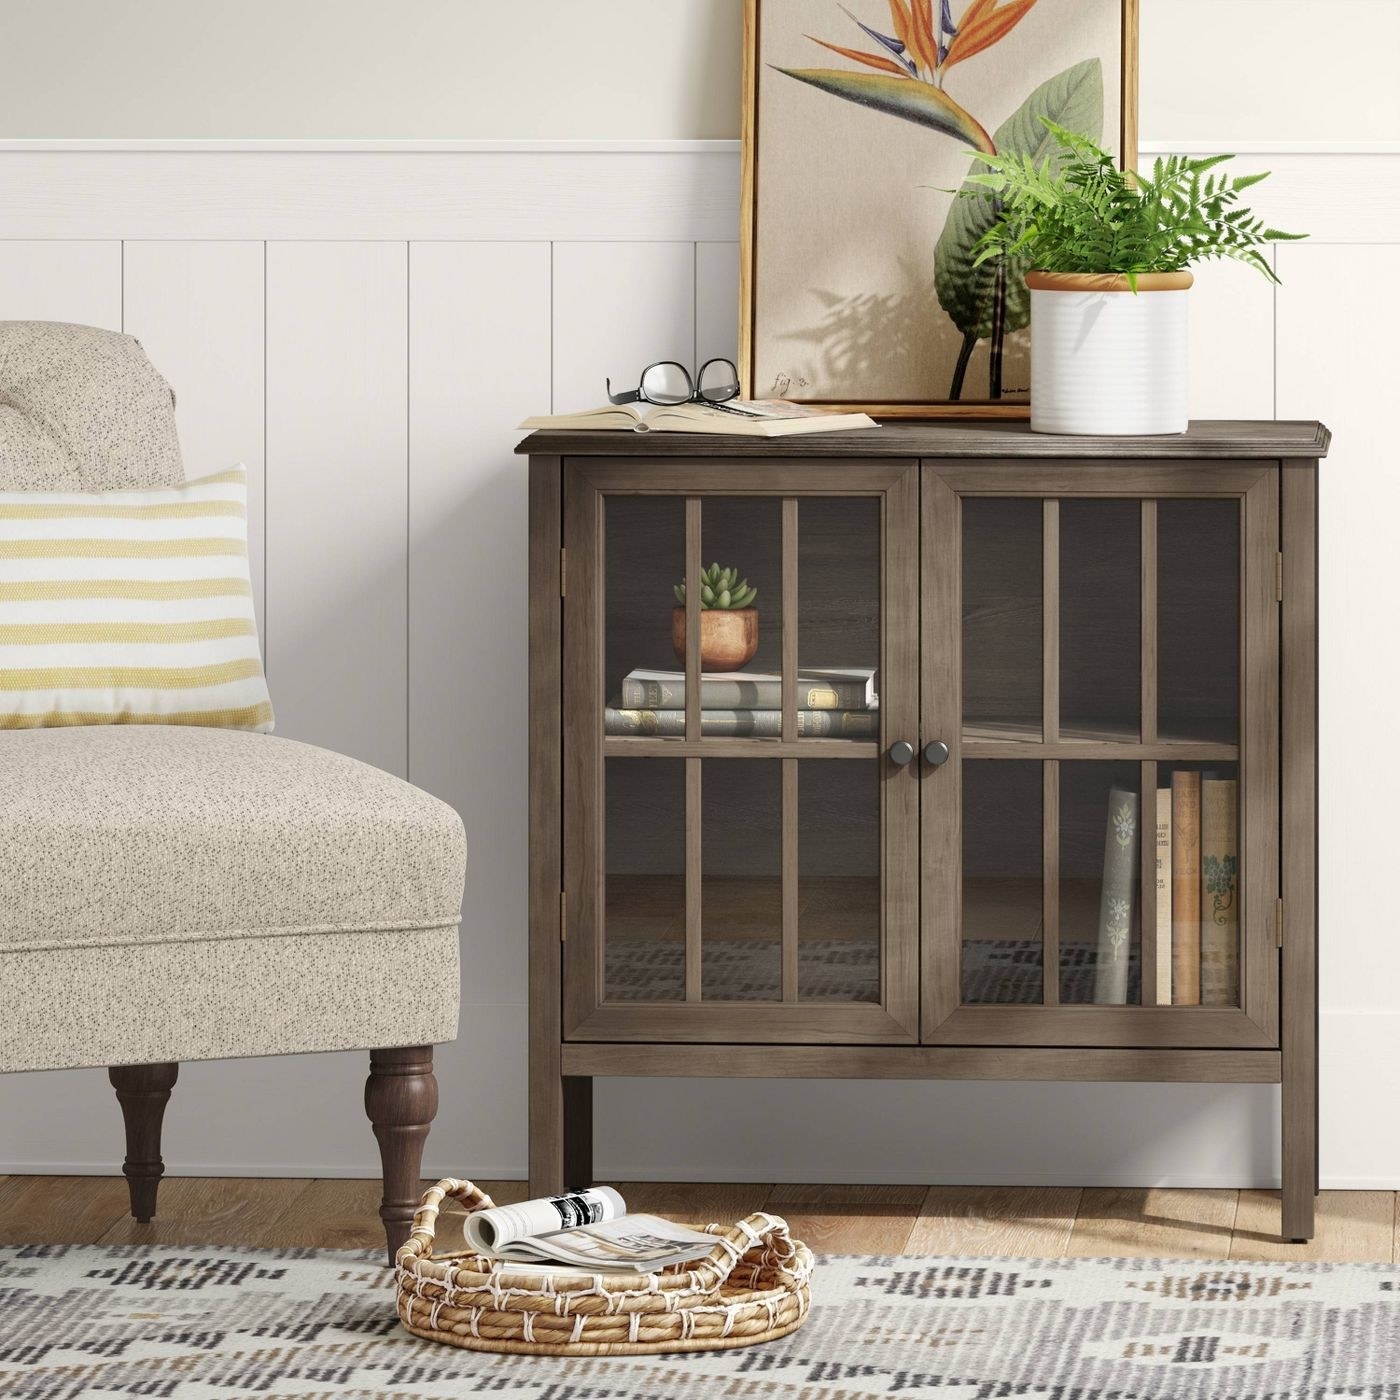 A brown two-door accent cabinet in a living room